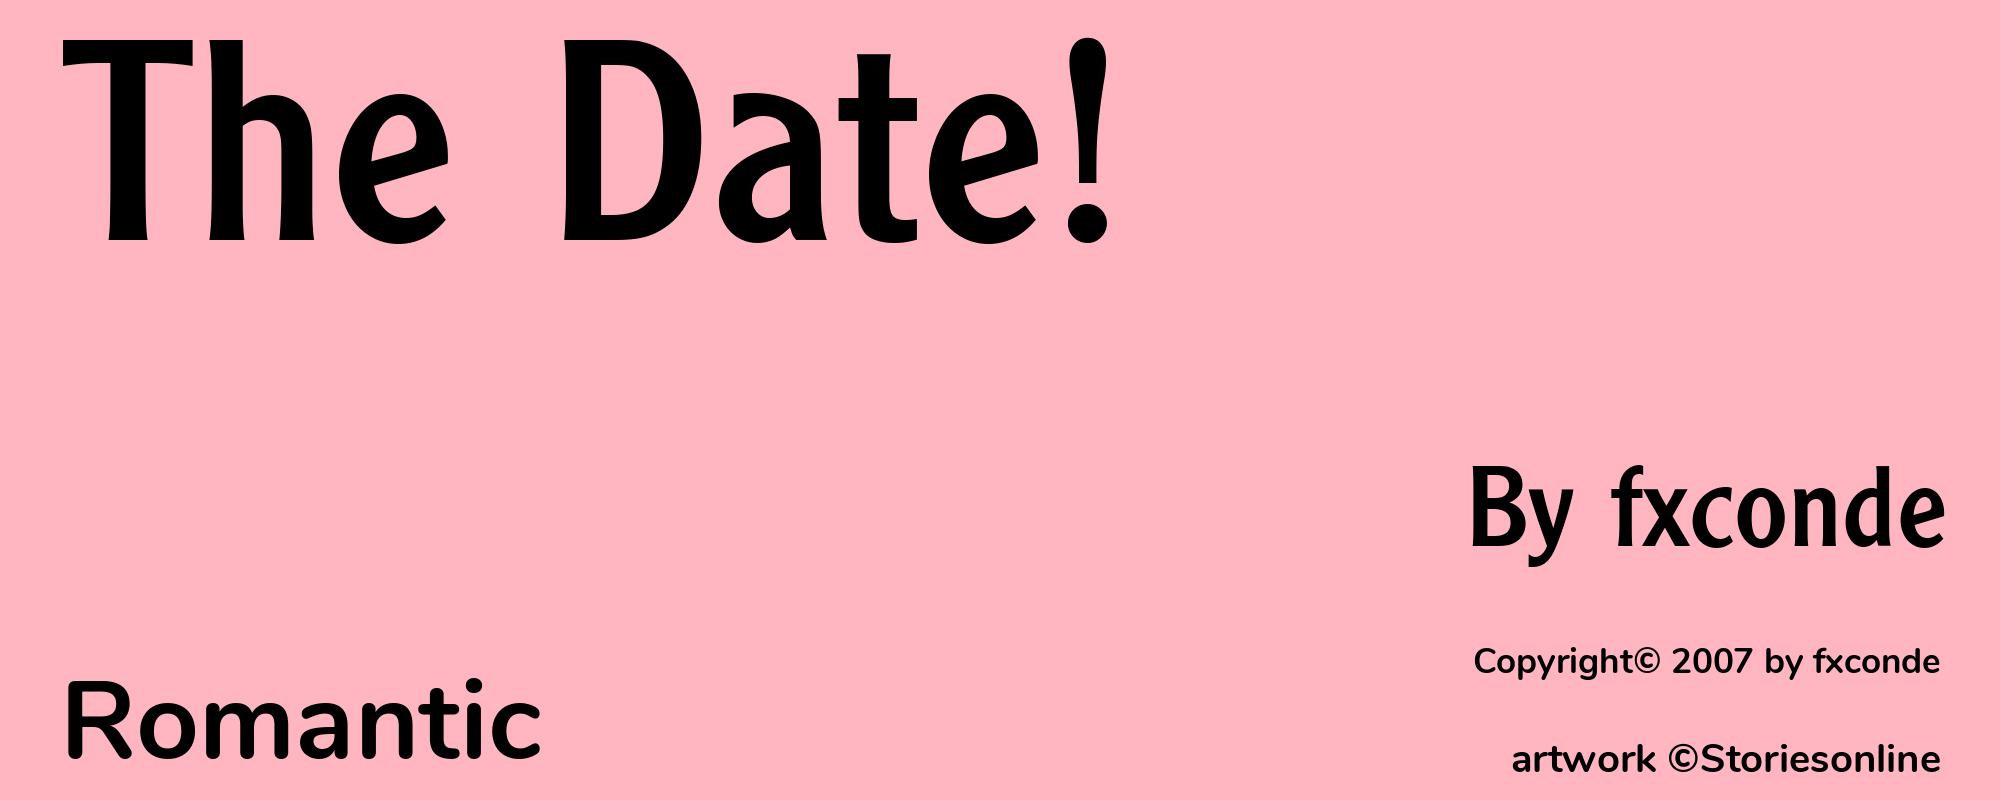 The Date! - Cover